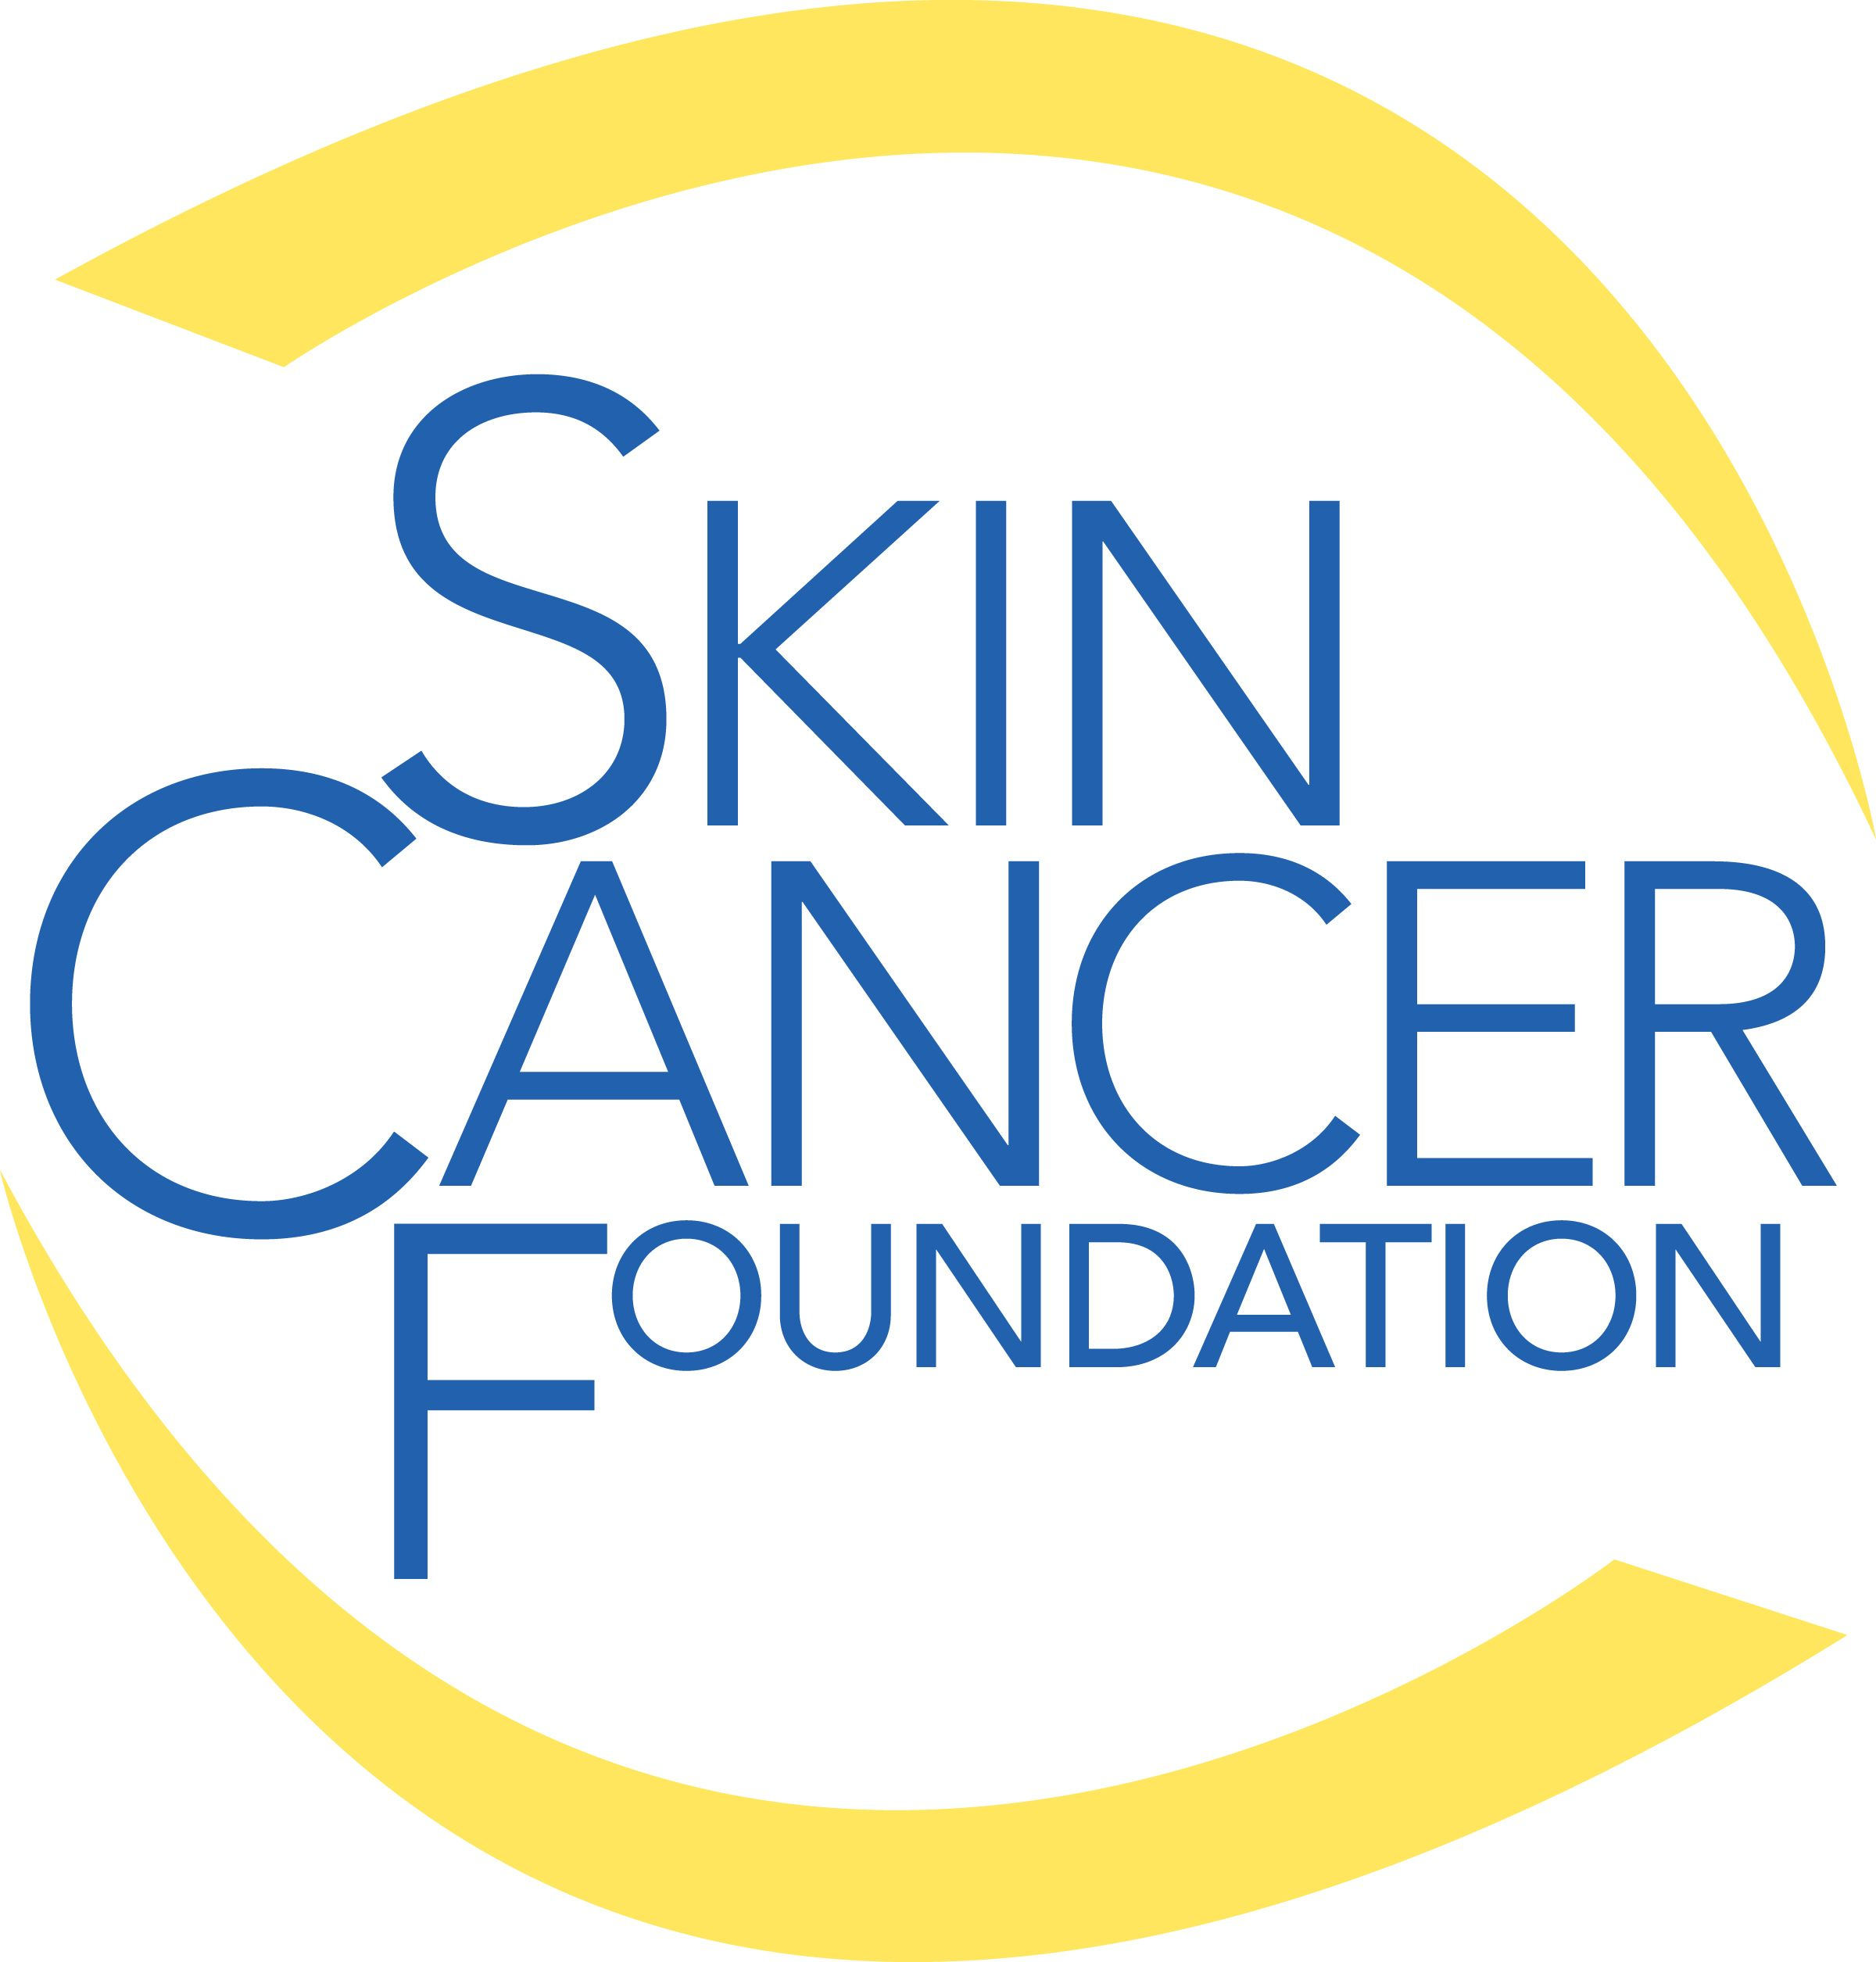 Buffalo Bills Head Coach Sean McDermott Teams Up with The Skin Cancer Foundation to Fight the World’s Most Common Cancer